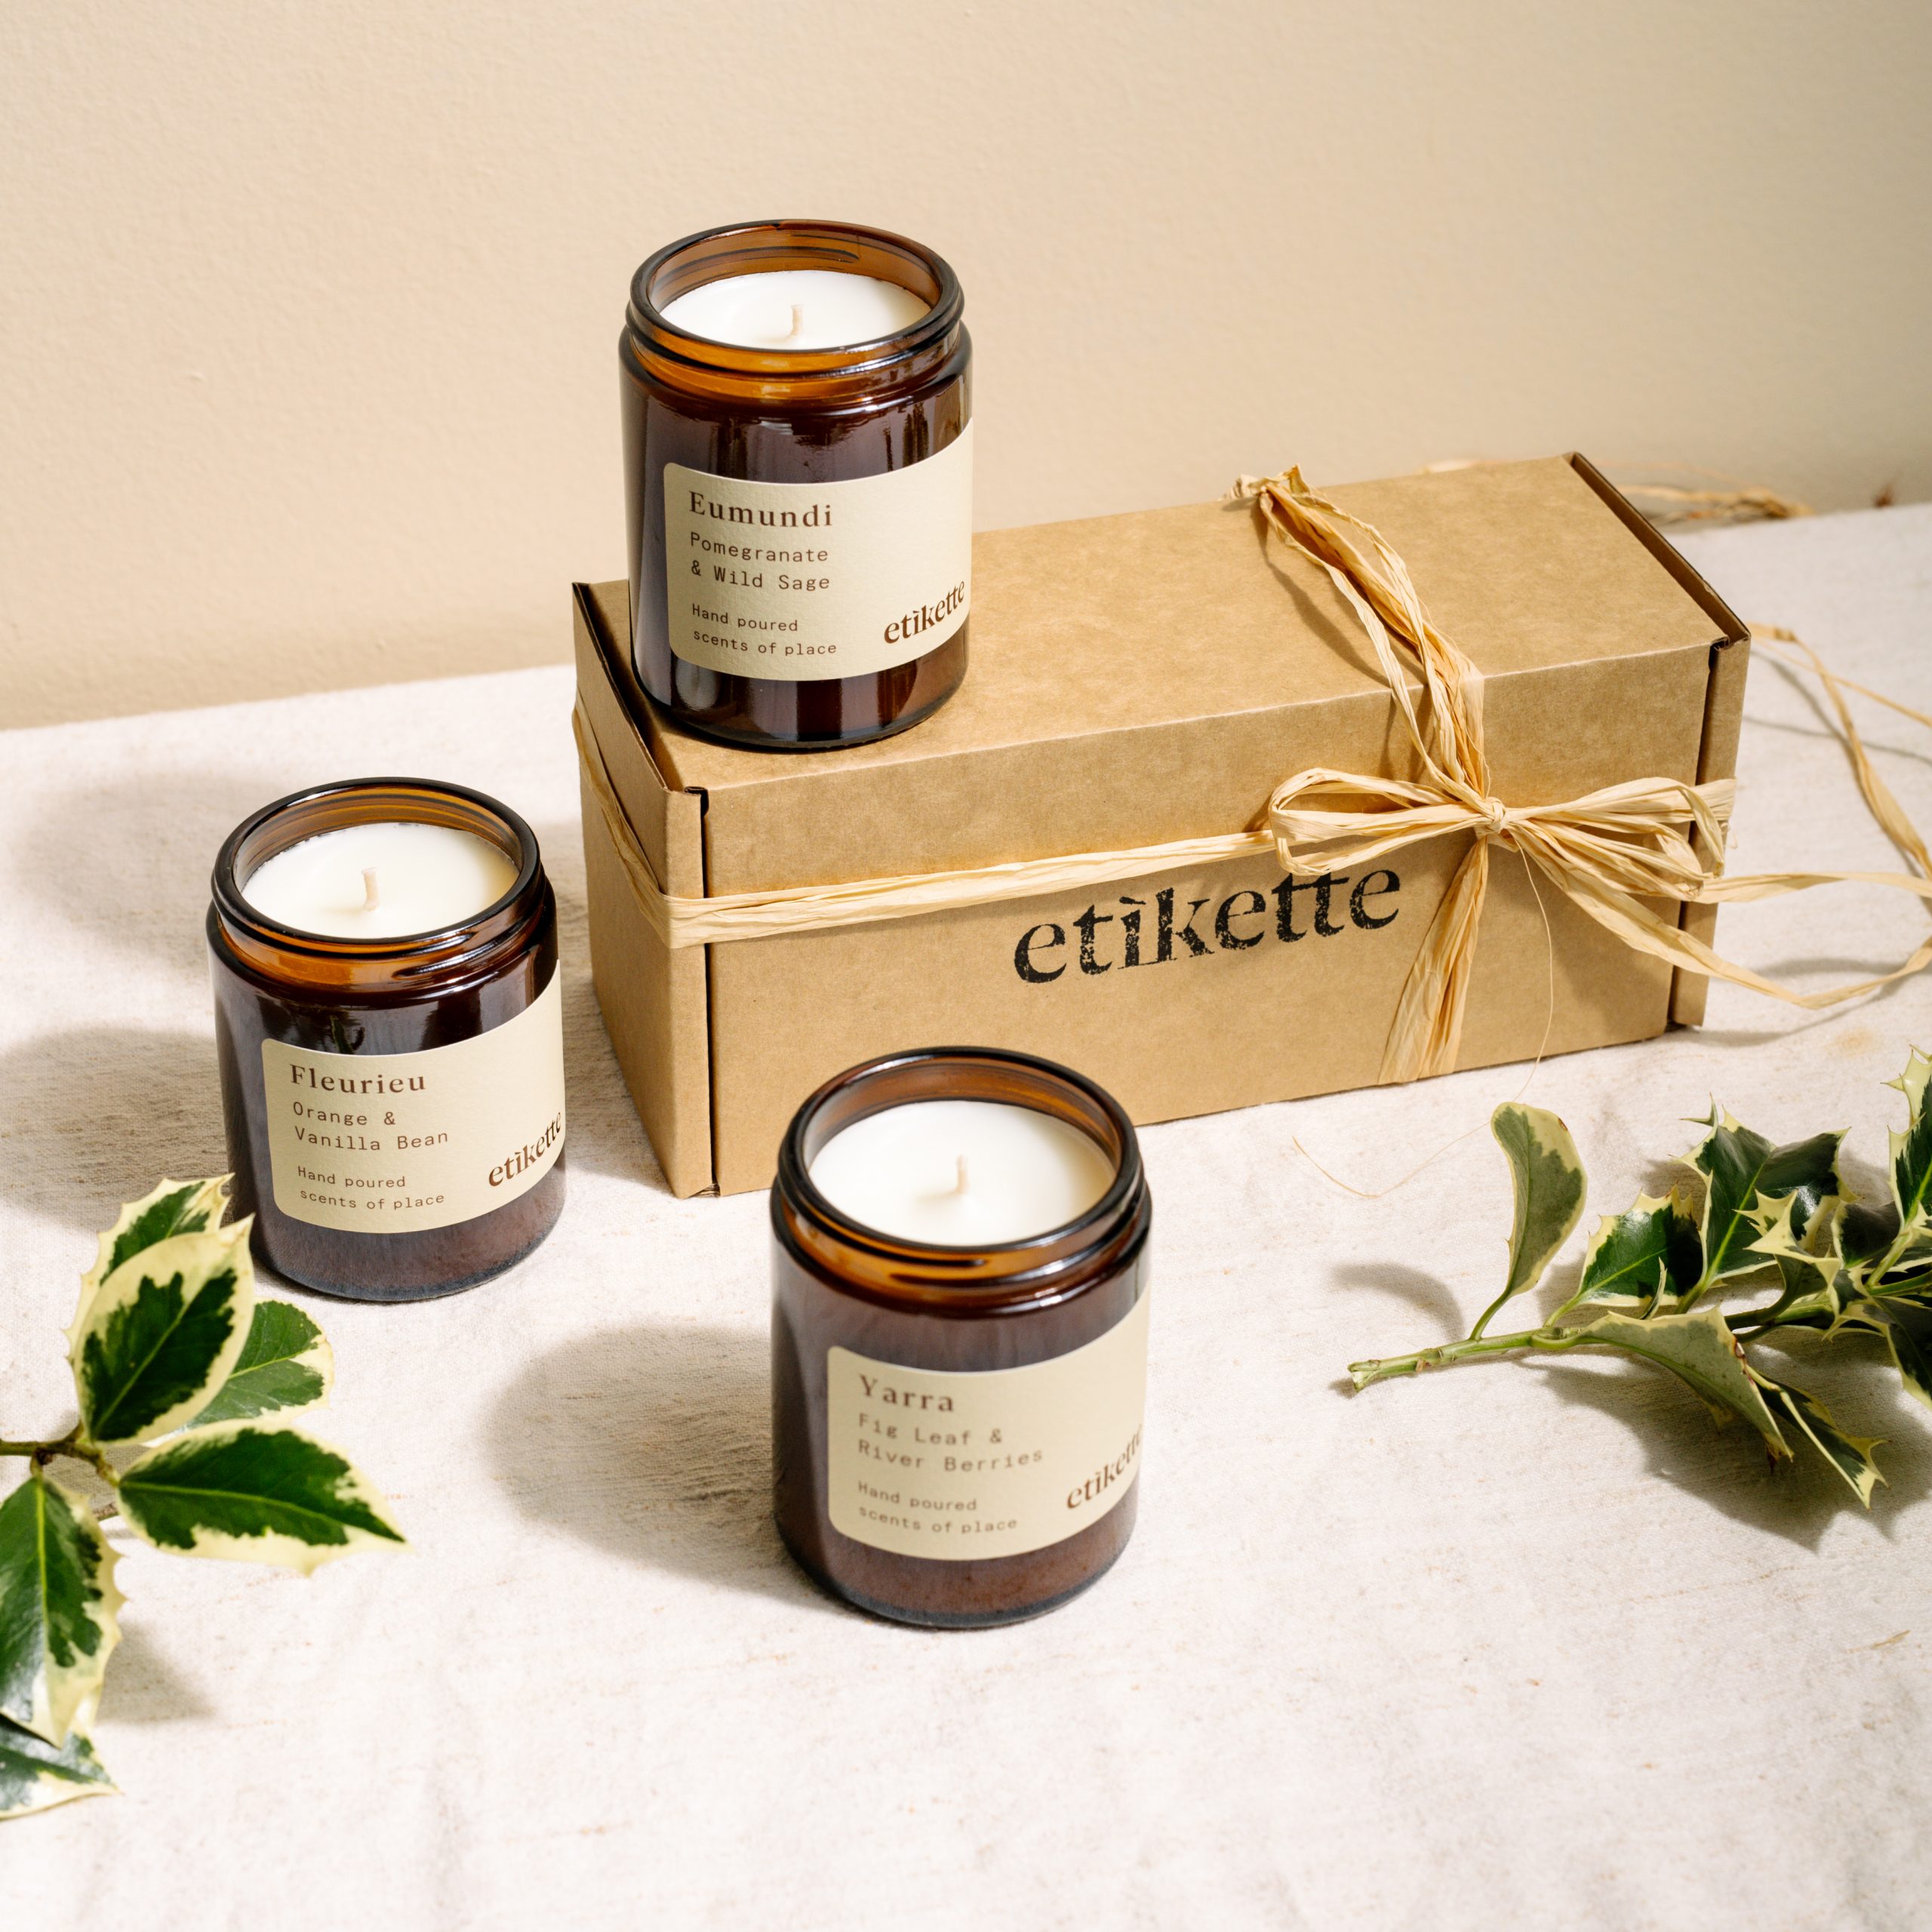 WIN a Christmas Candle Making Workshop for you and 4 friends at Etikette Candles!